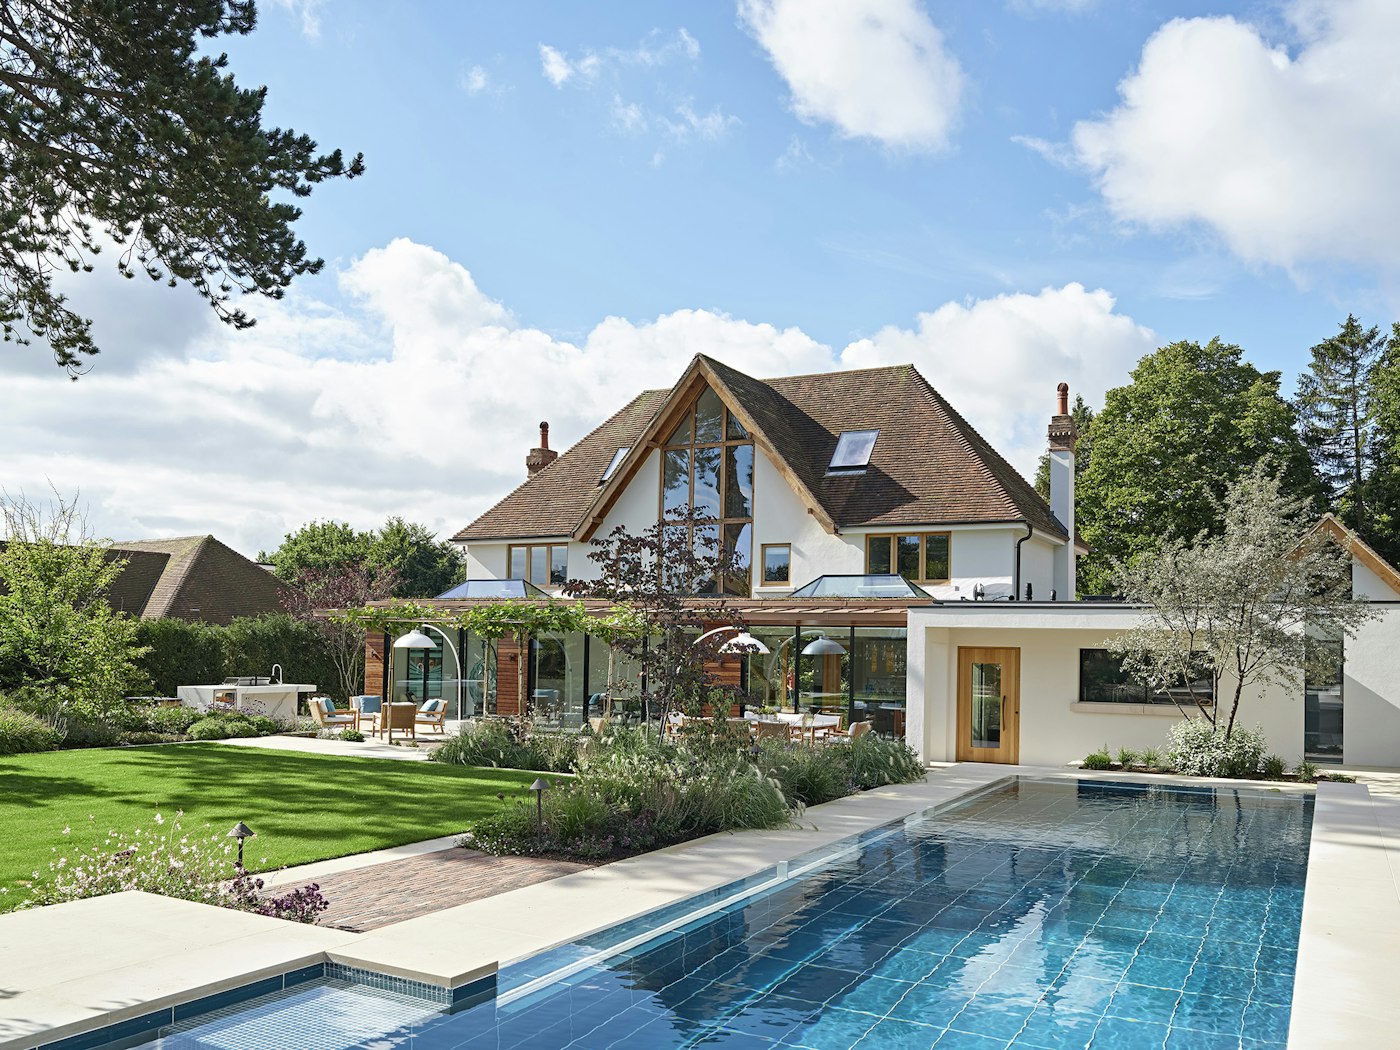 The back of the house is equally impressive with a beautiful pool